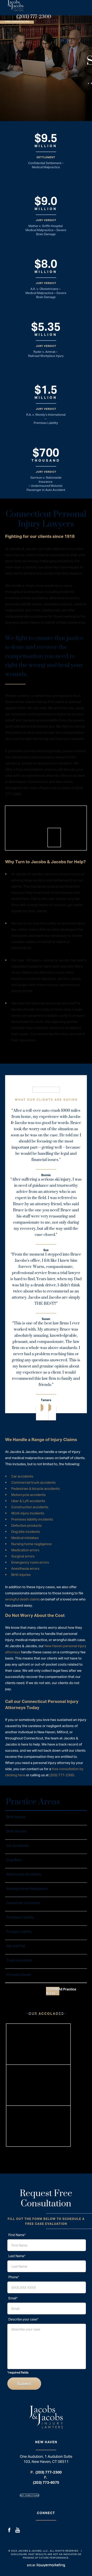 Jacobs & Jacobs Attorneys At Law - New Haven CT Lawyers